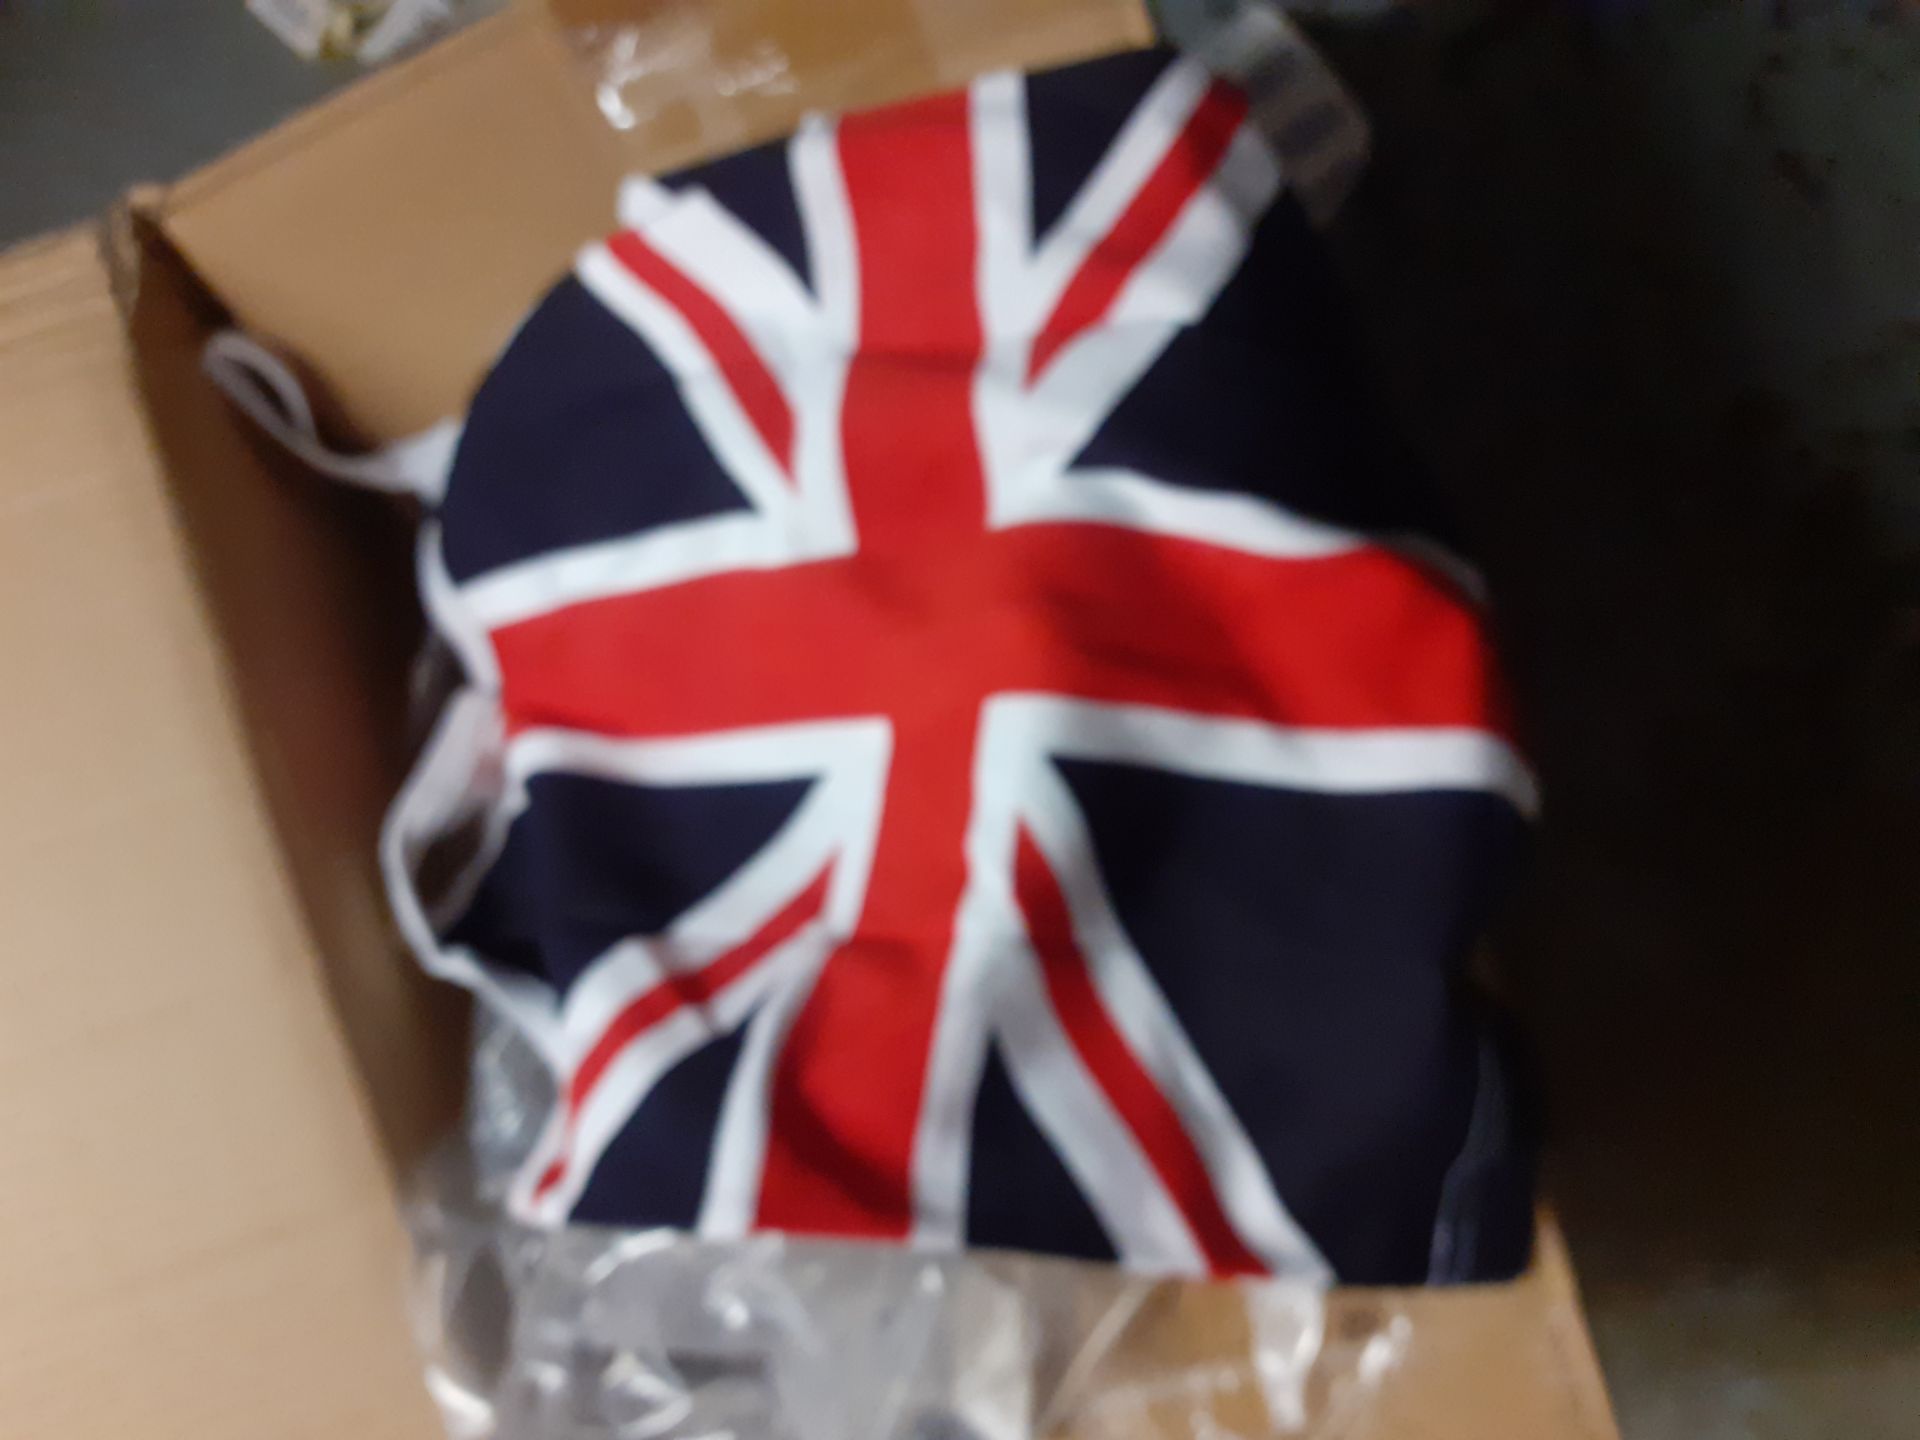 Quantity of London Themed T-Shirts & Union Jack Vests to Shelving - Image 3 of 3